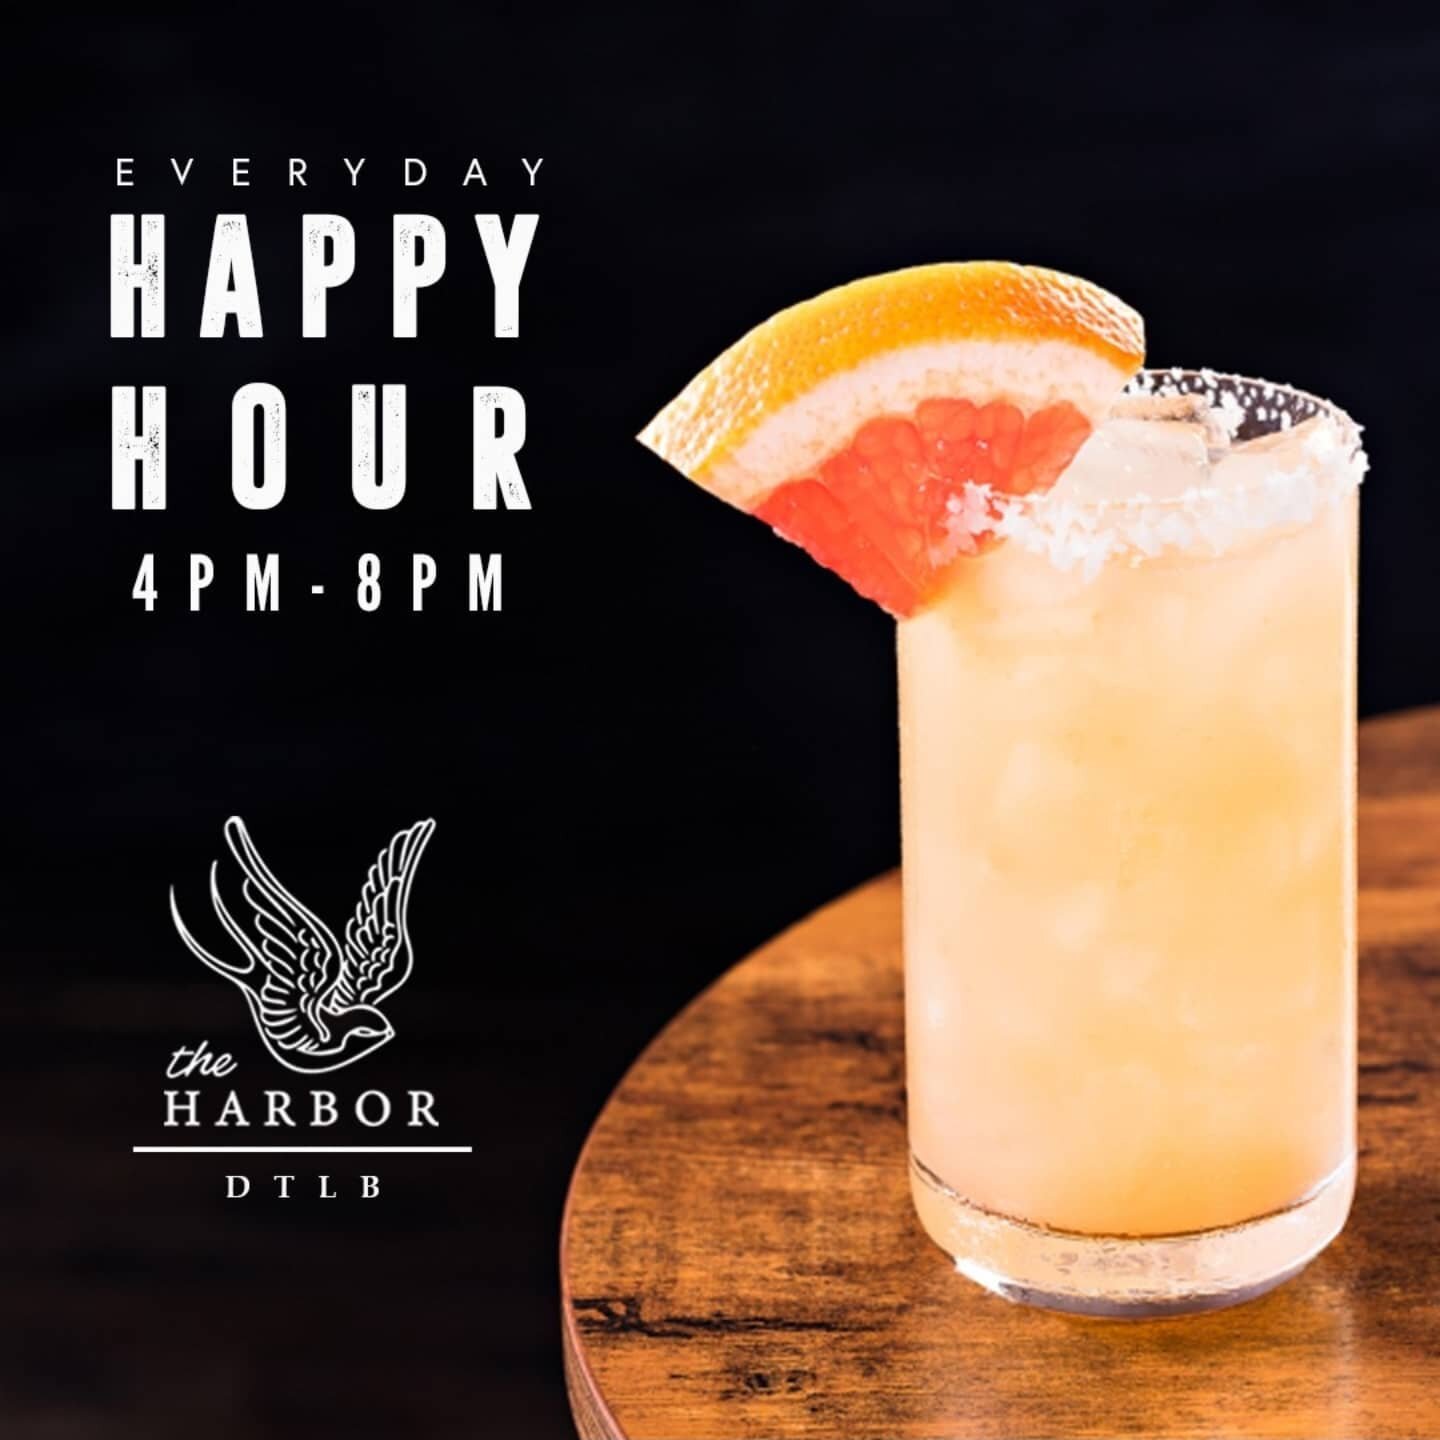 Is it 4PM yet? lol | Try our Refreshing Paloma! Perfect for our Thursday Happy Hour! #paloma #craftcocktails | Happy Hour 4PM-8PM
.
.
.
.
#theharborlb #longbeach #lbc #dlba #cocktails #friday #dlba #sportsbar #thirstythursday